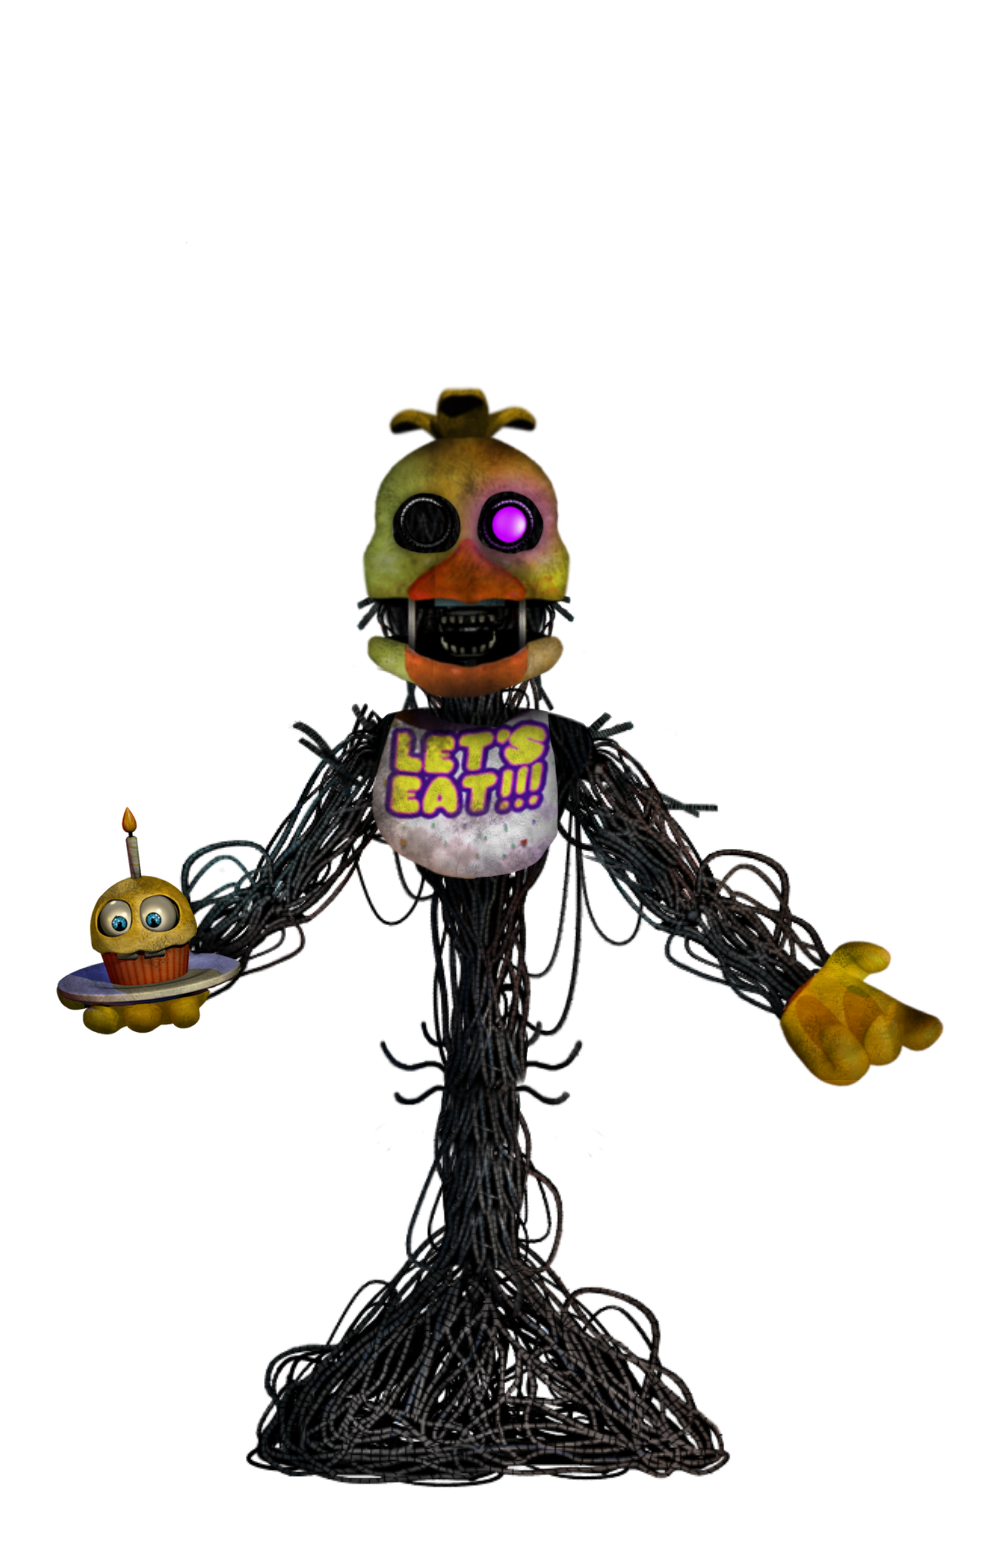 Withered fnaf plus chica by TimetoGetCreative0 on DeviantArt